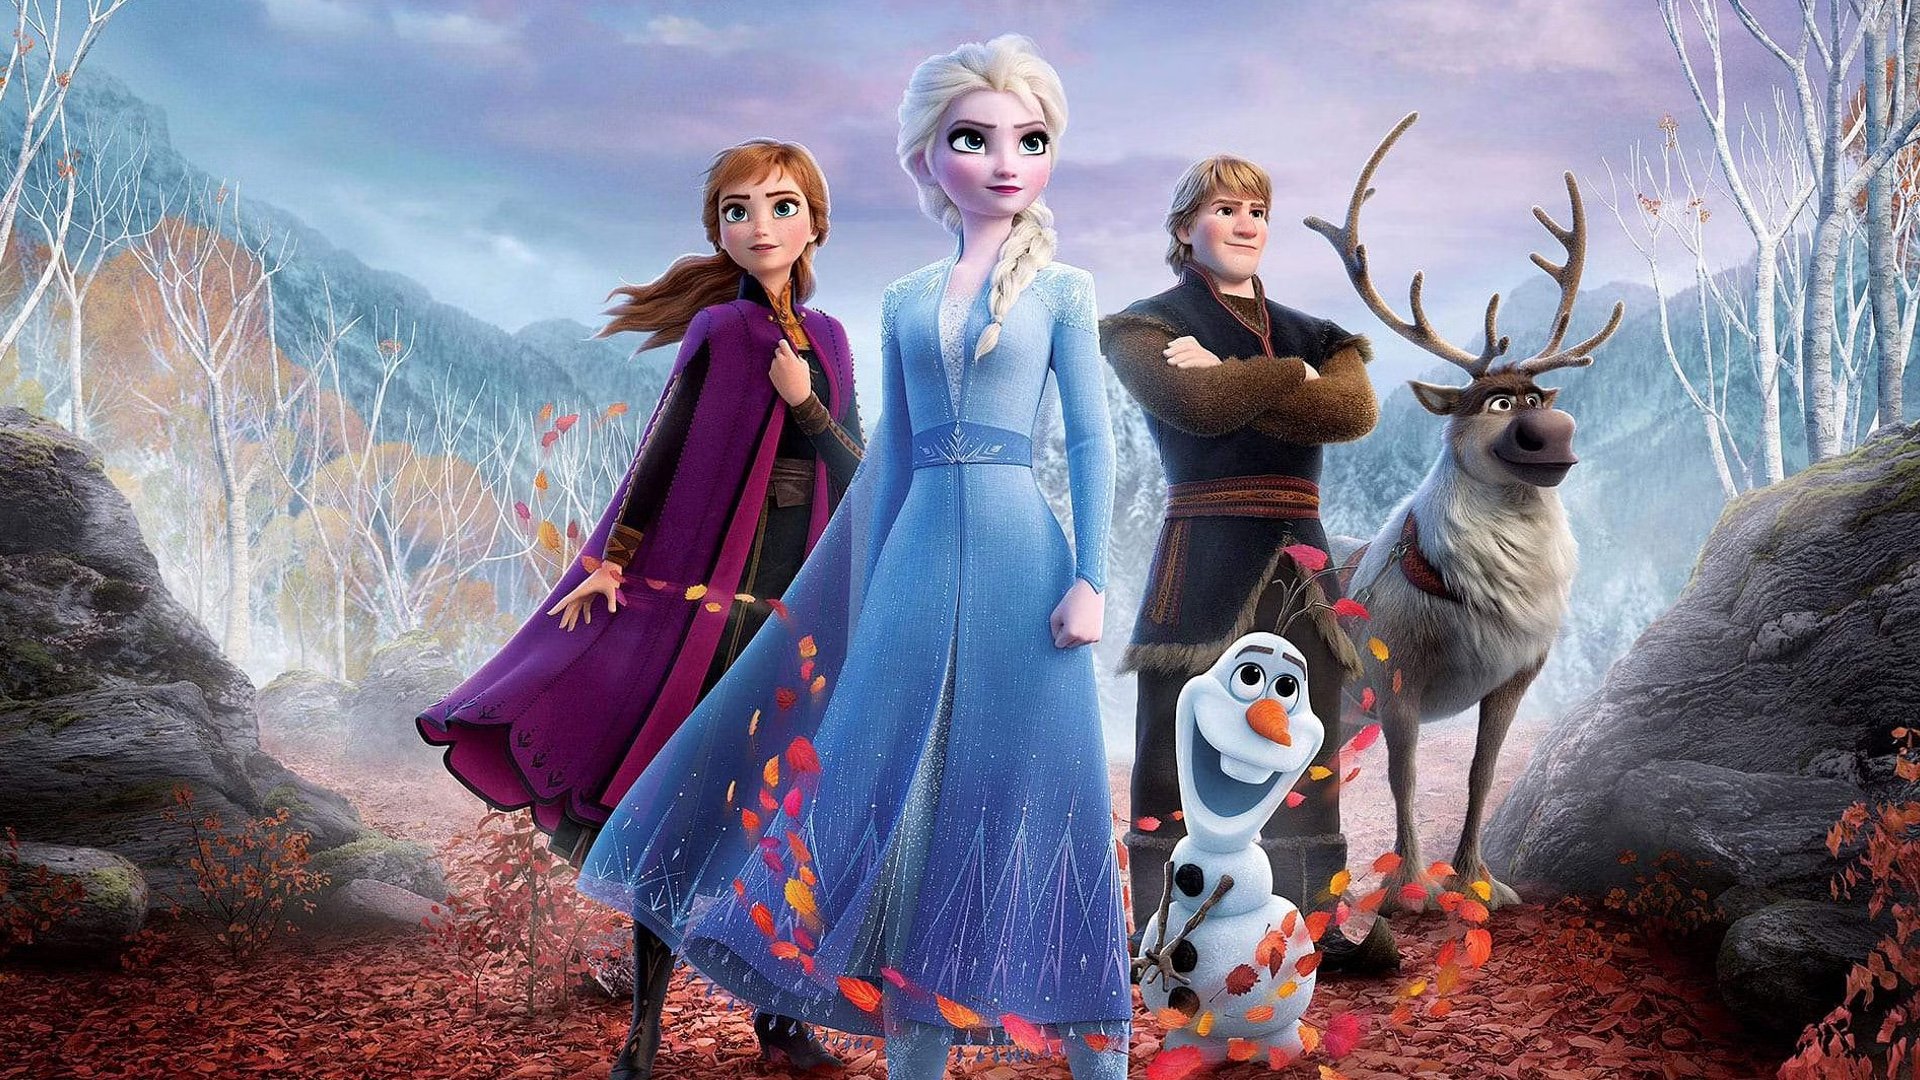 frozen: Frozen 4 Movie: All you may want to know - The Economic Times